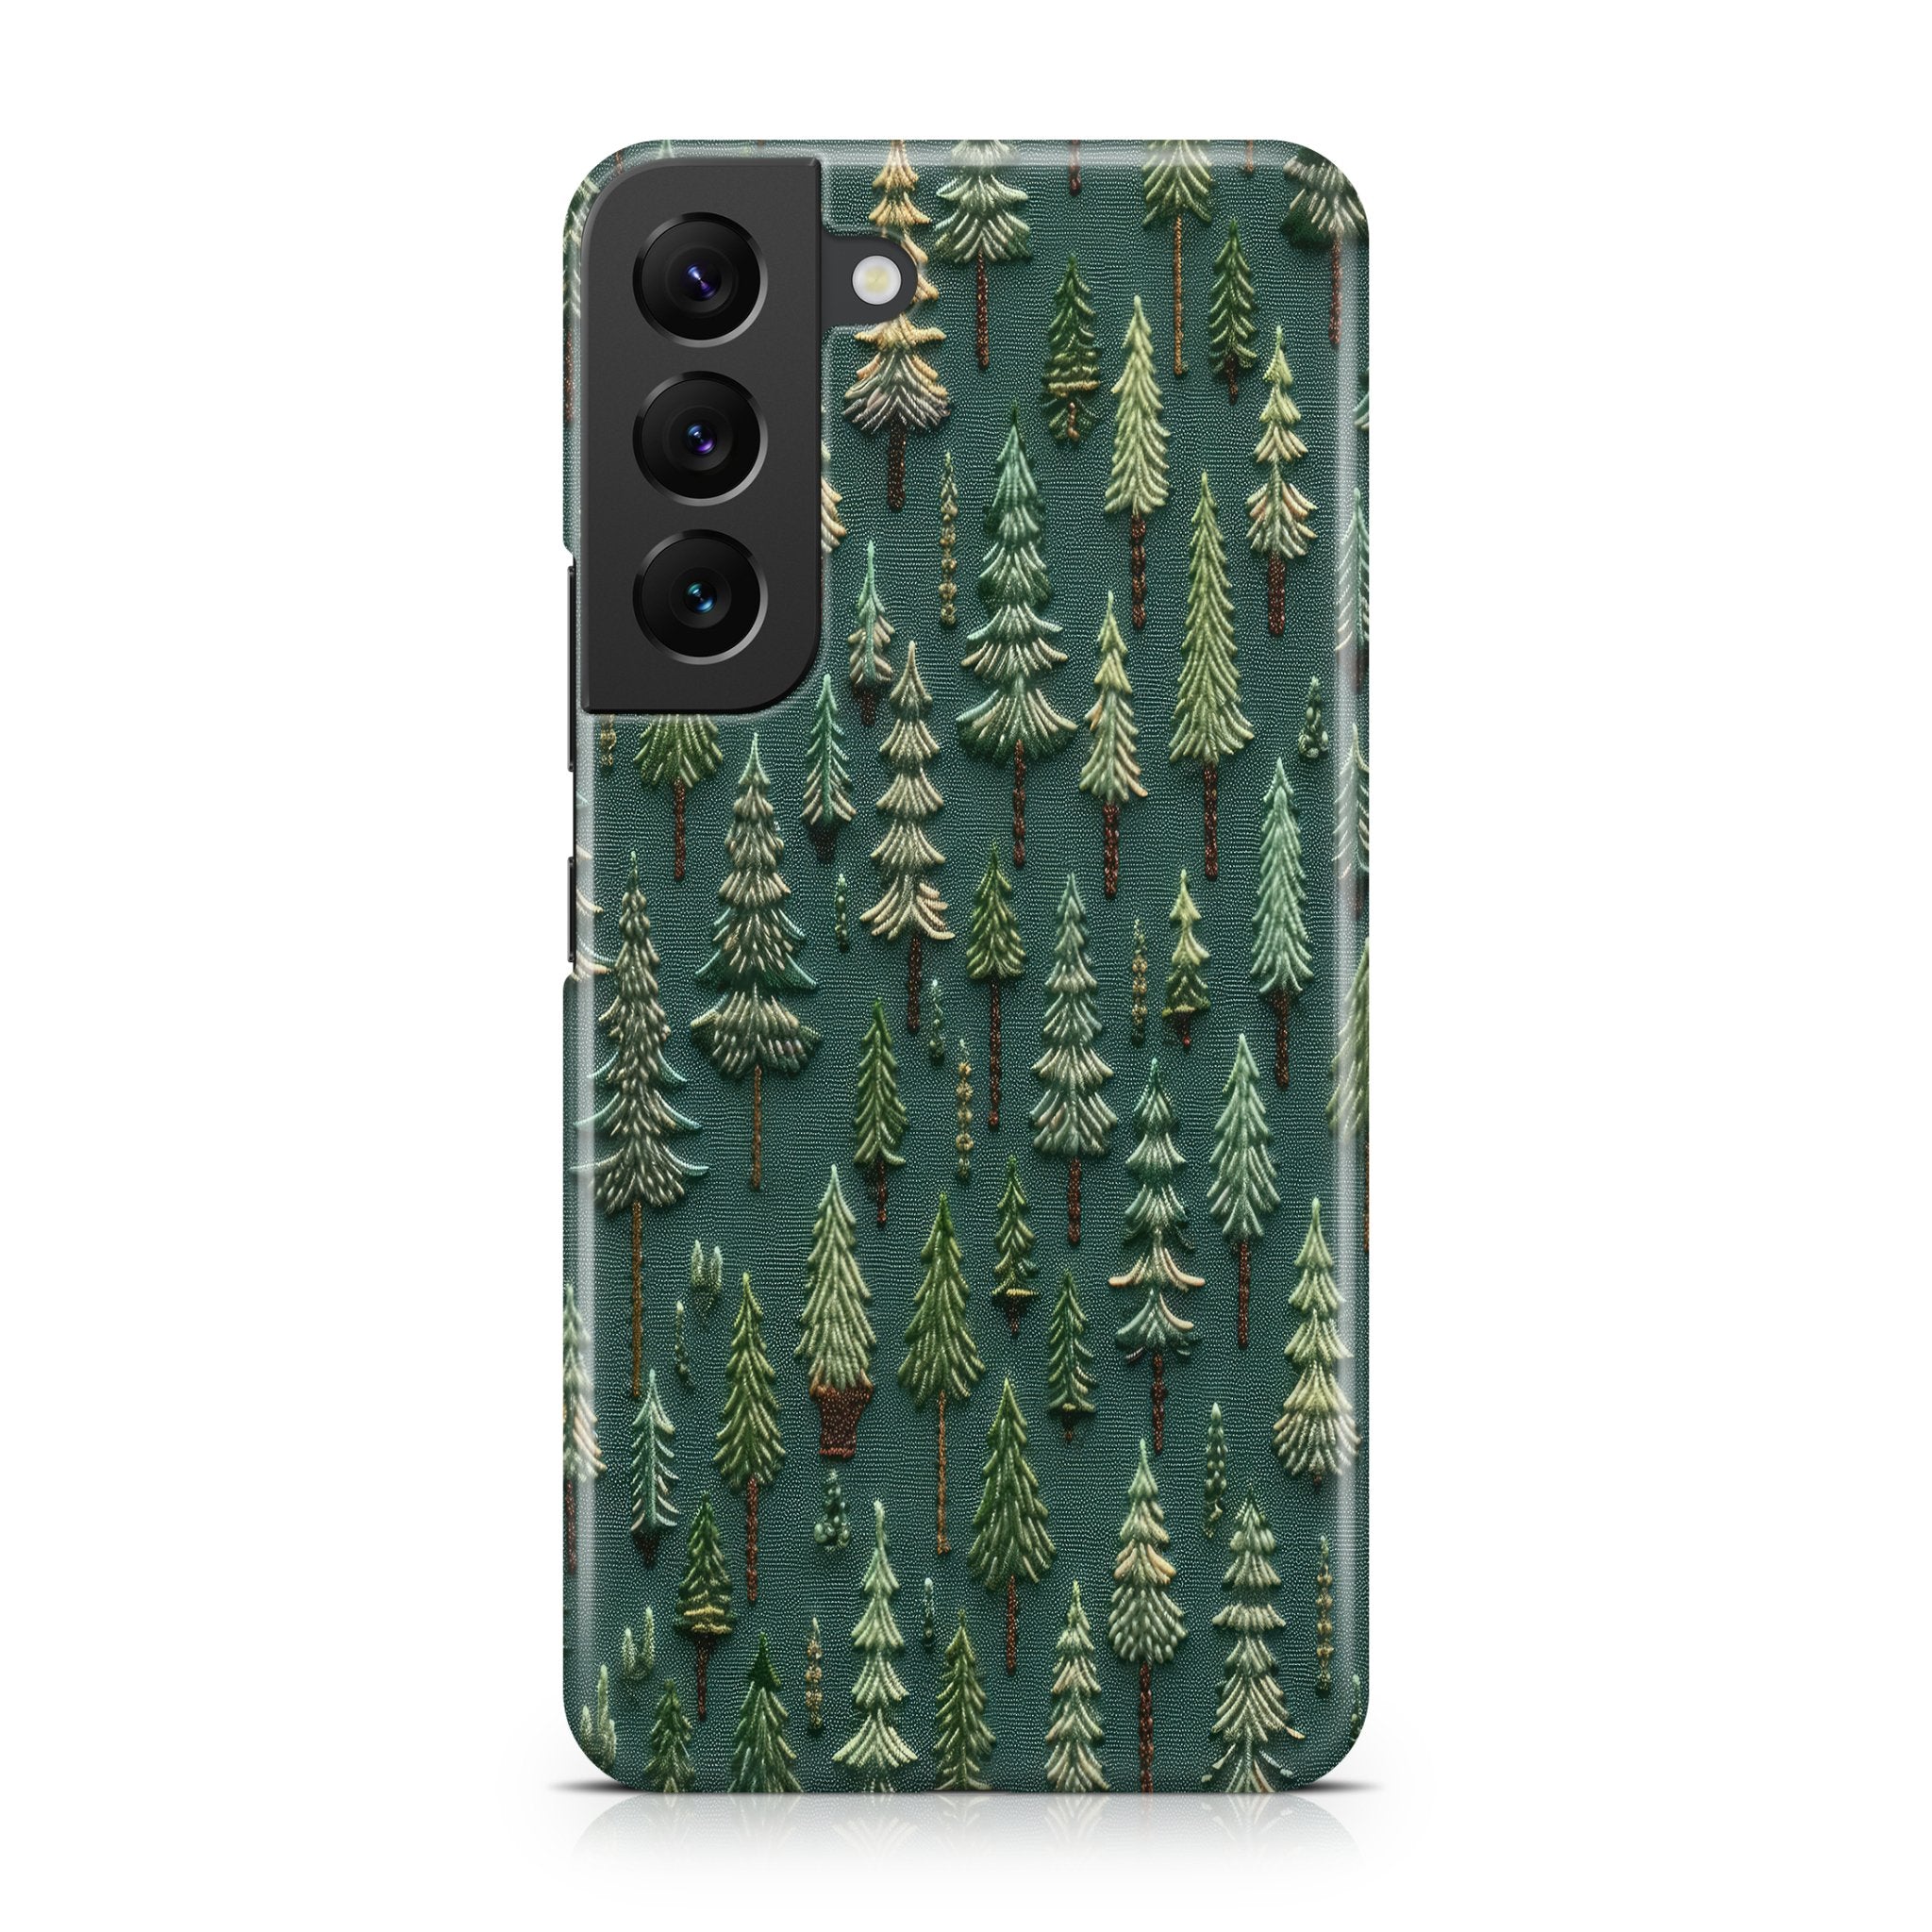 Embroidered Forest - Samsung phone case designs by CaseSwagger